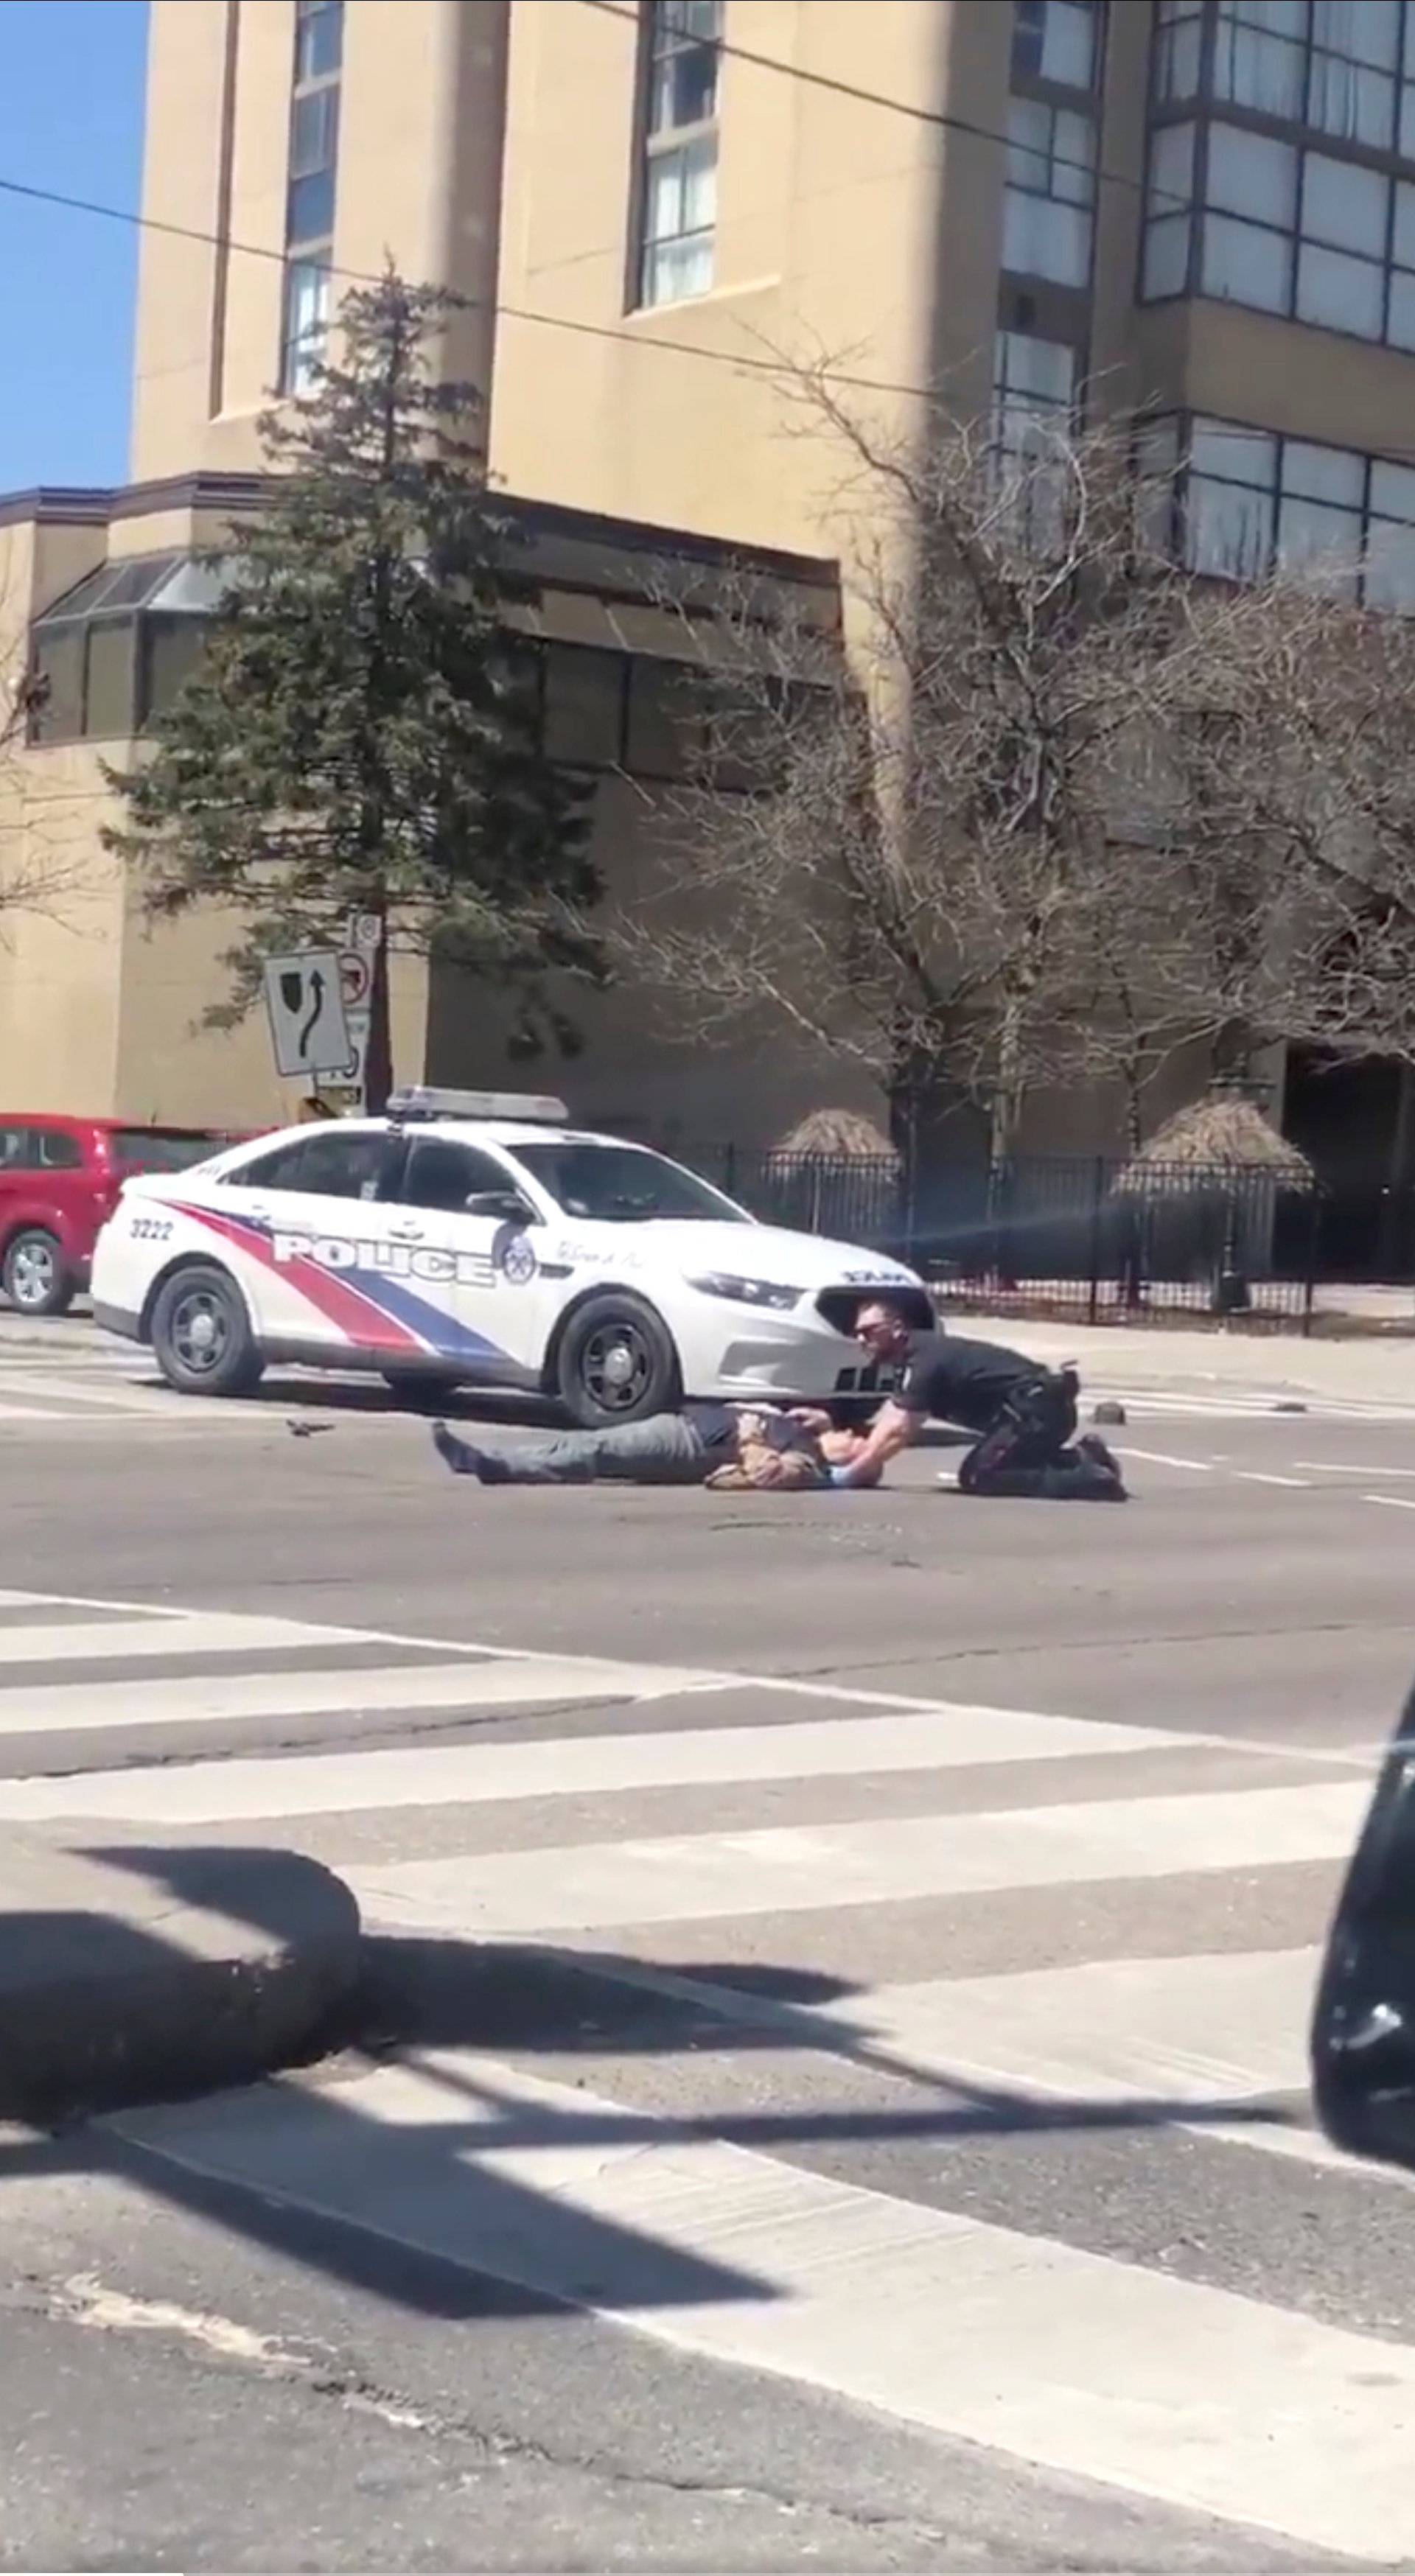 A victim is helped by police officer after a van hit multiple people at a major intersection in Toronto